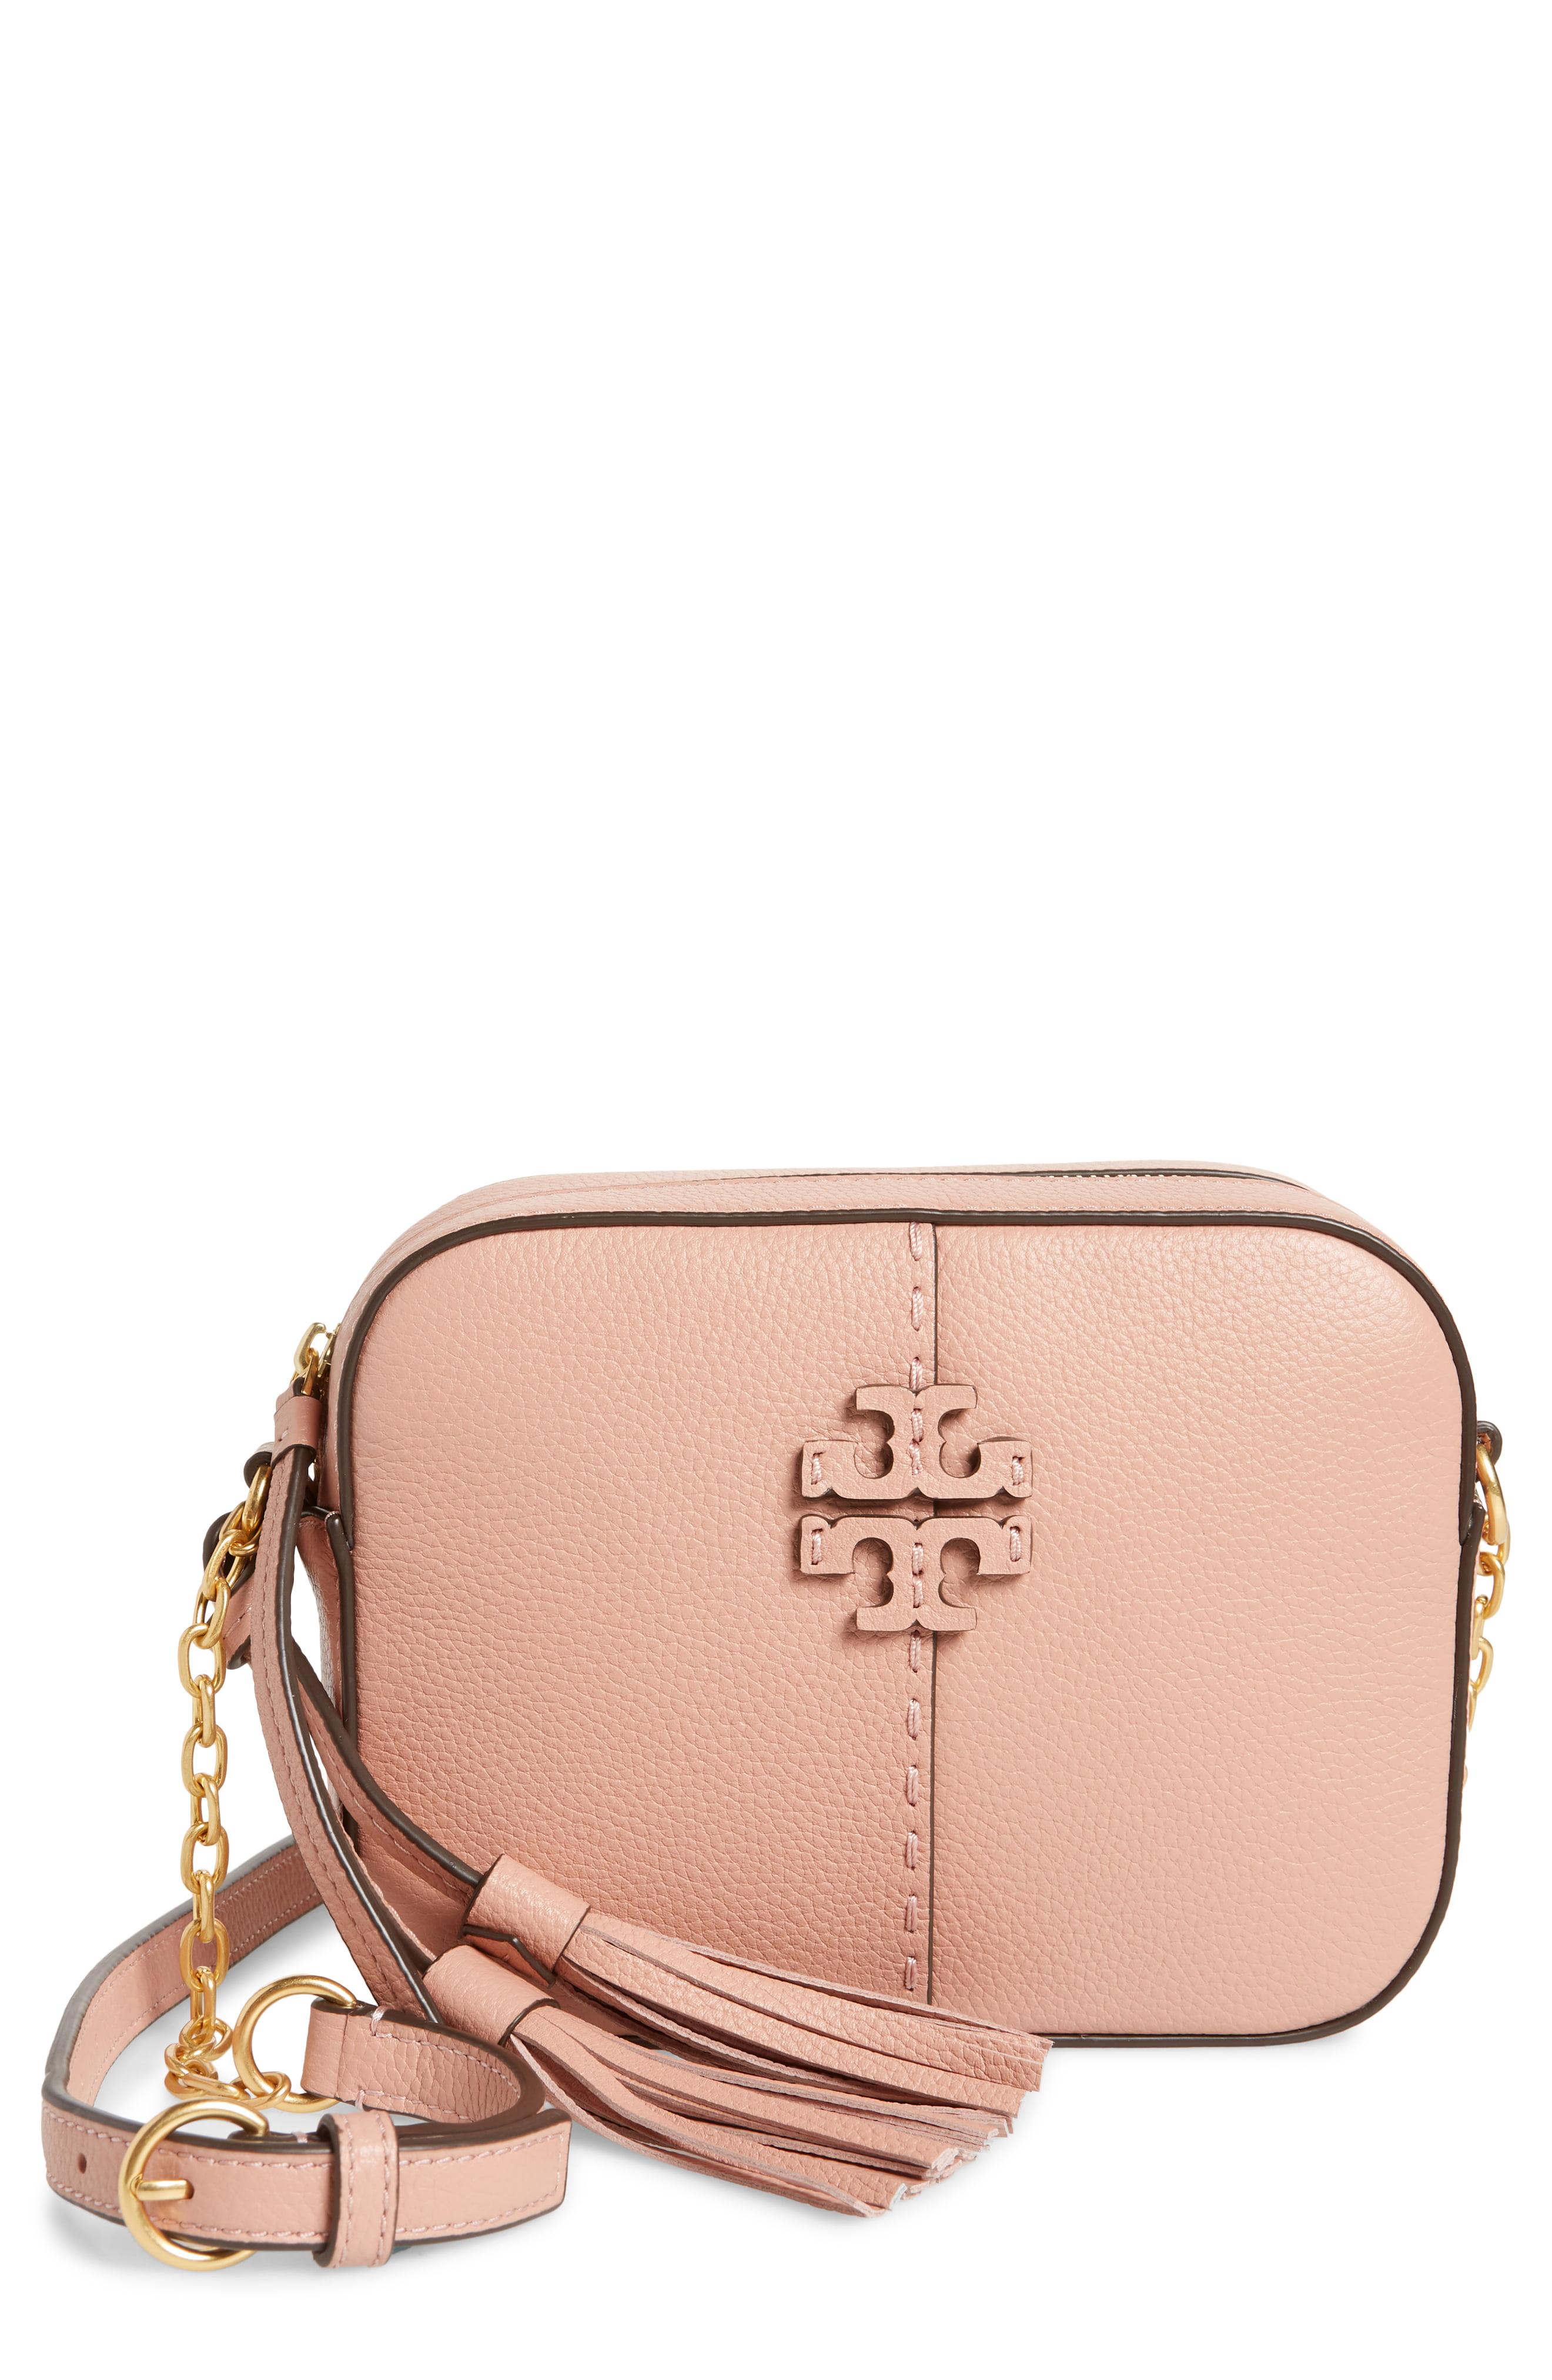 Tory Burch Leather Mcgraw Camera Bag in Pink - Lyst